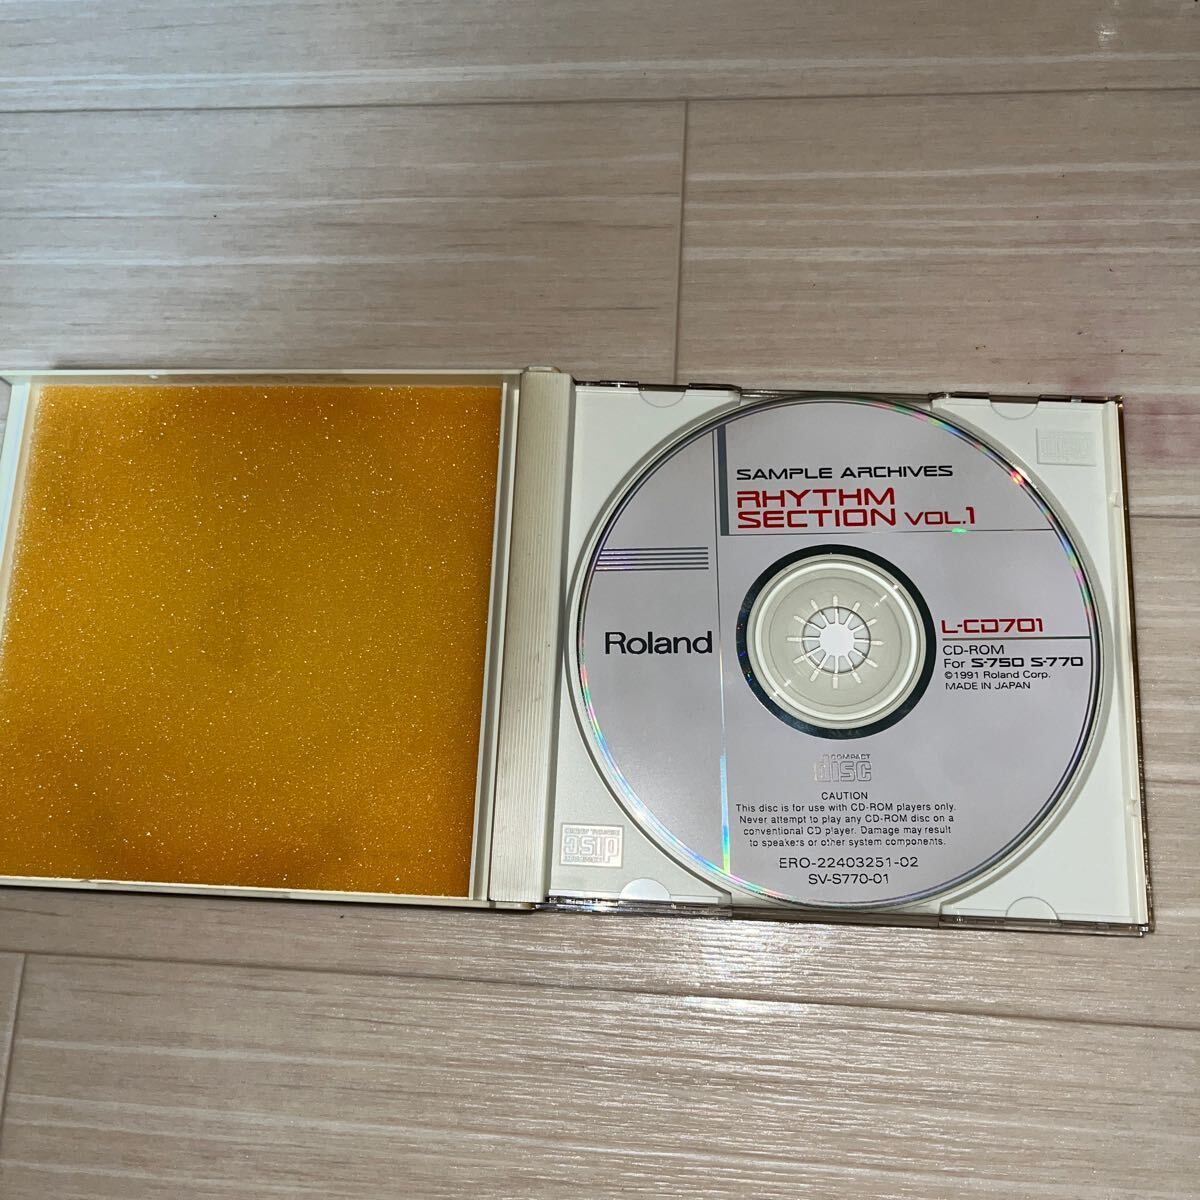 【S-700シリーズ用】Roland Sample Archives / Orchestral Family vol.1-2 (L-CD702)(2CD-ROM)【サンプリングCD】_画像4